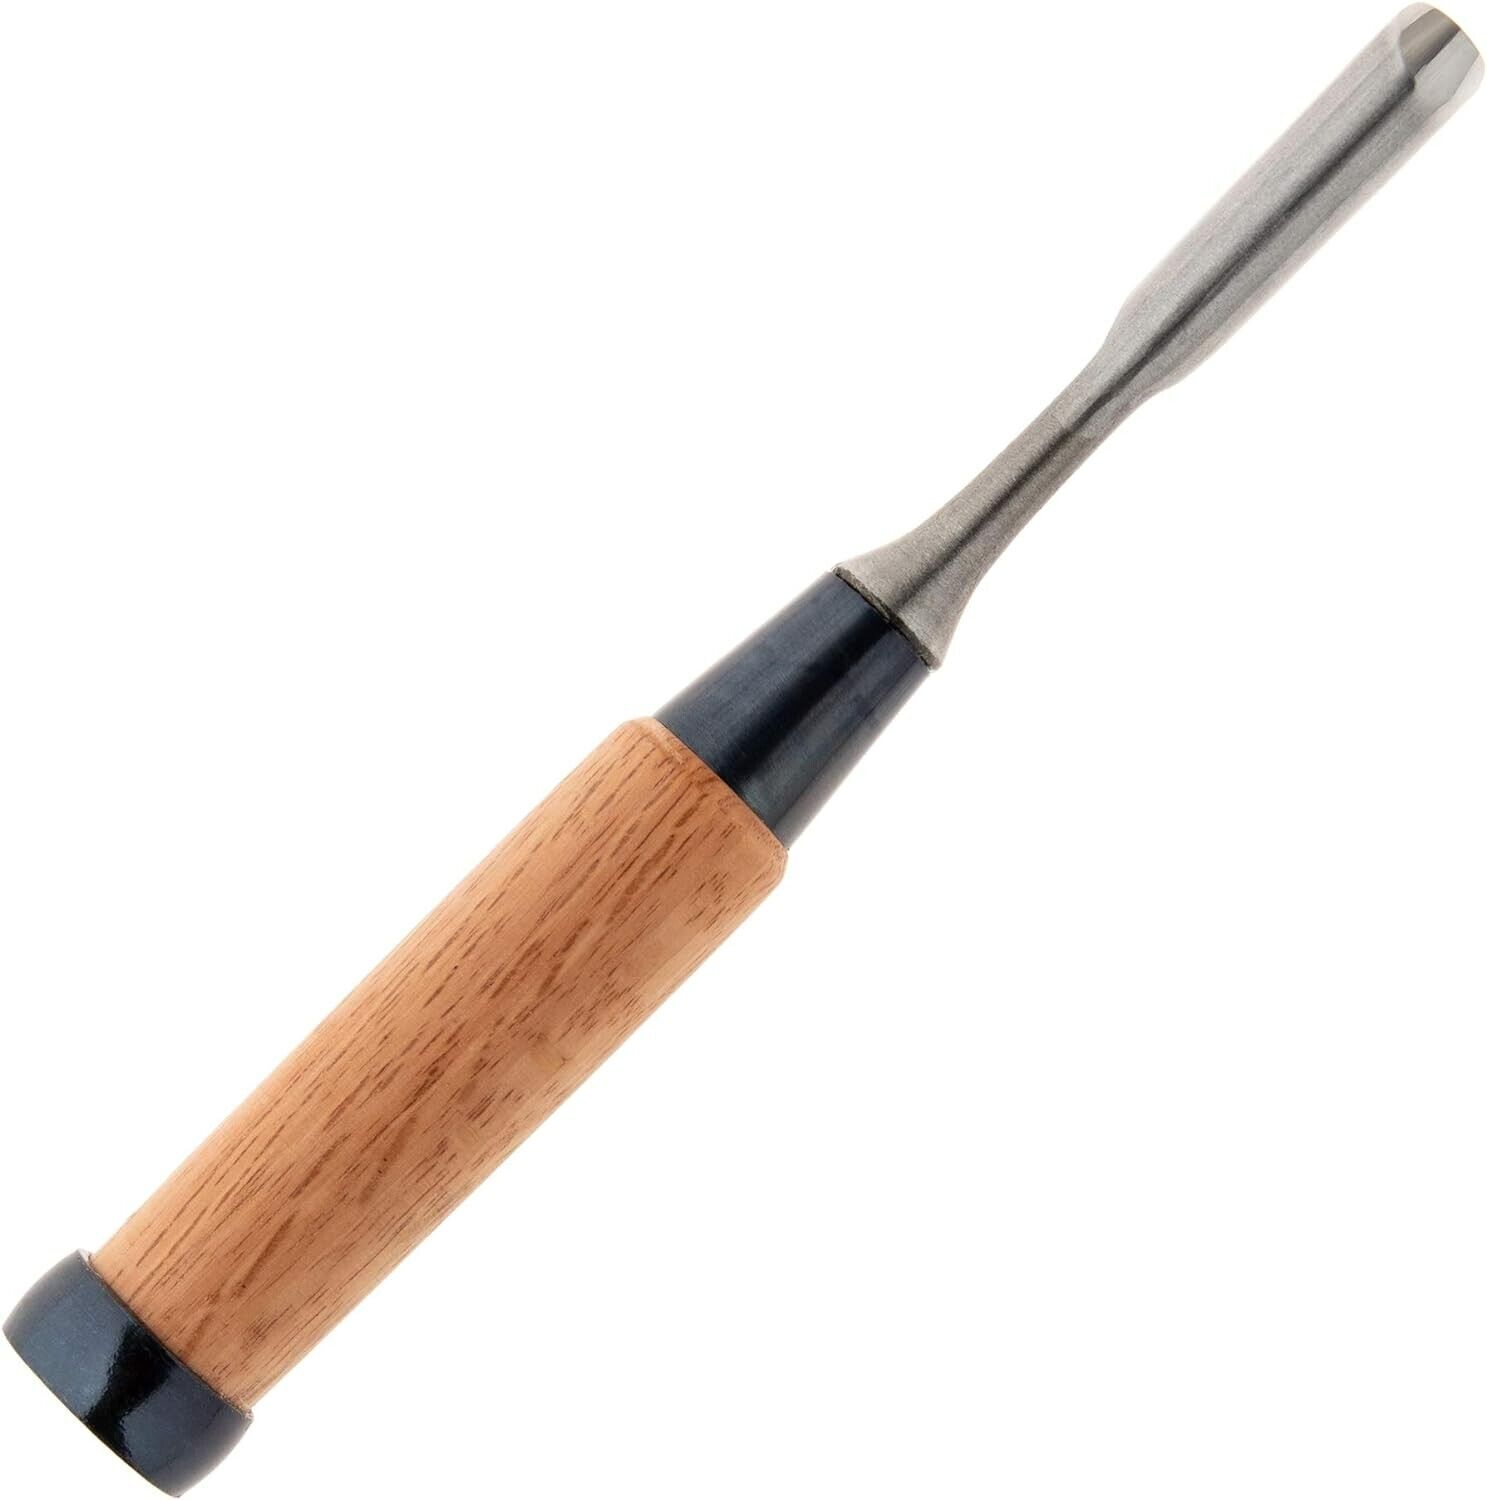 Kakuri Japanese Wood Carving Chisel Nomi Round Hand Tool 0.35 Inches 9mm